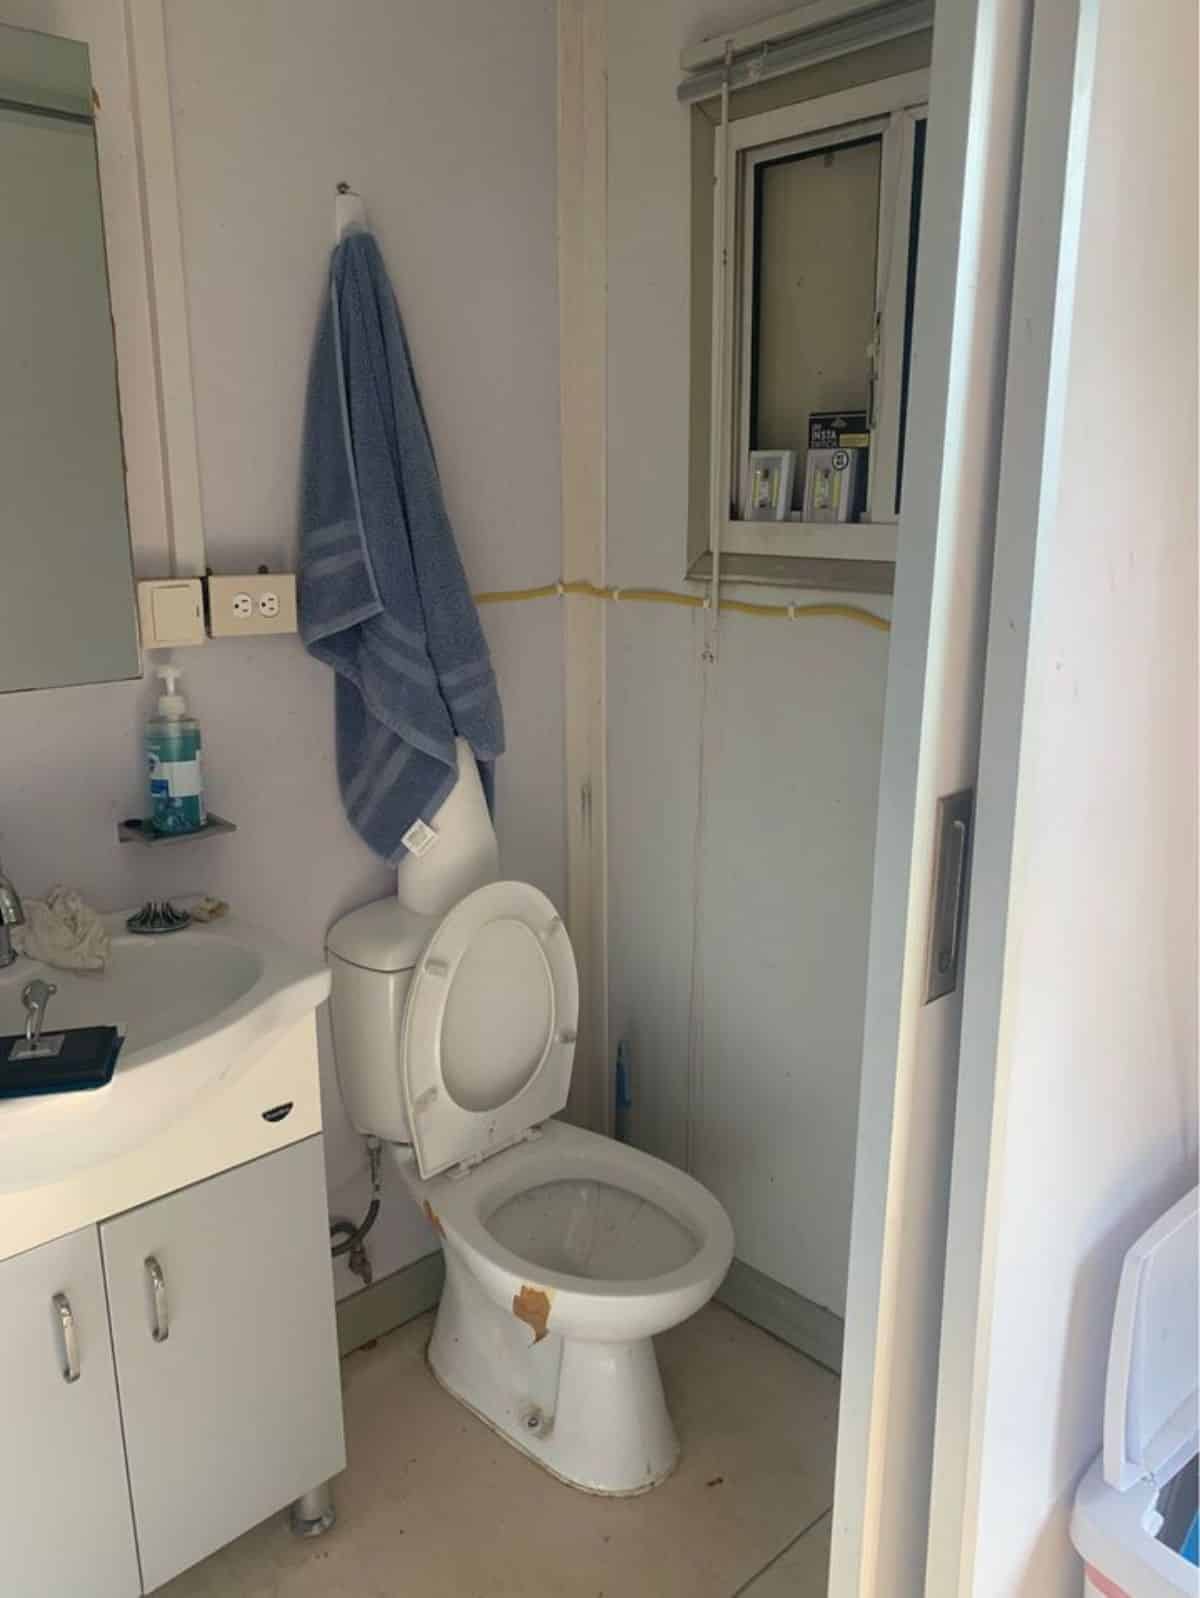 bathroom of 20' single room tiny home has all the standard fittings